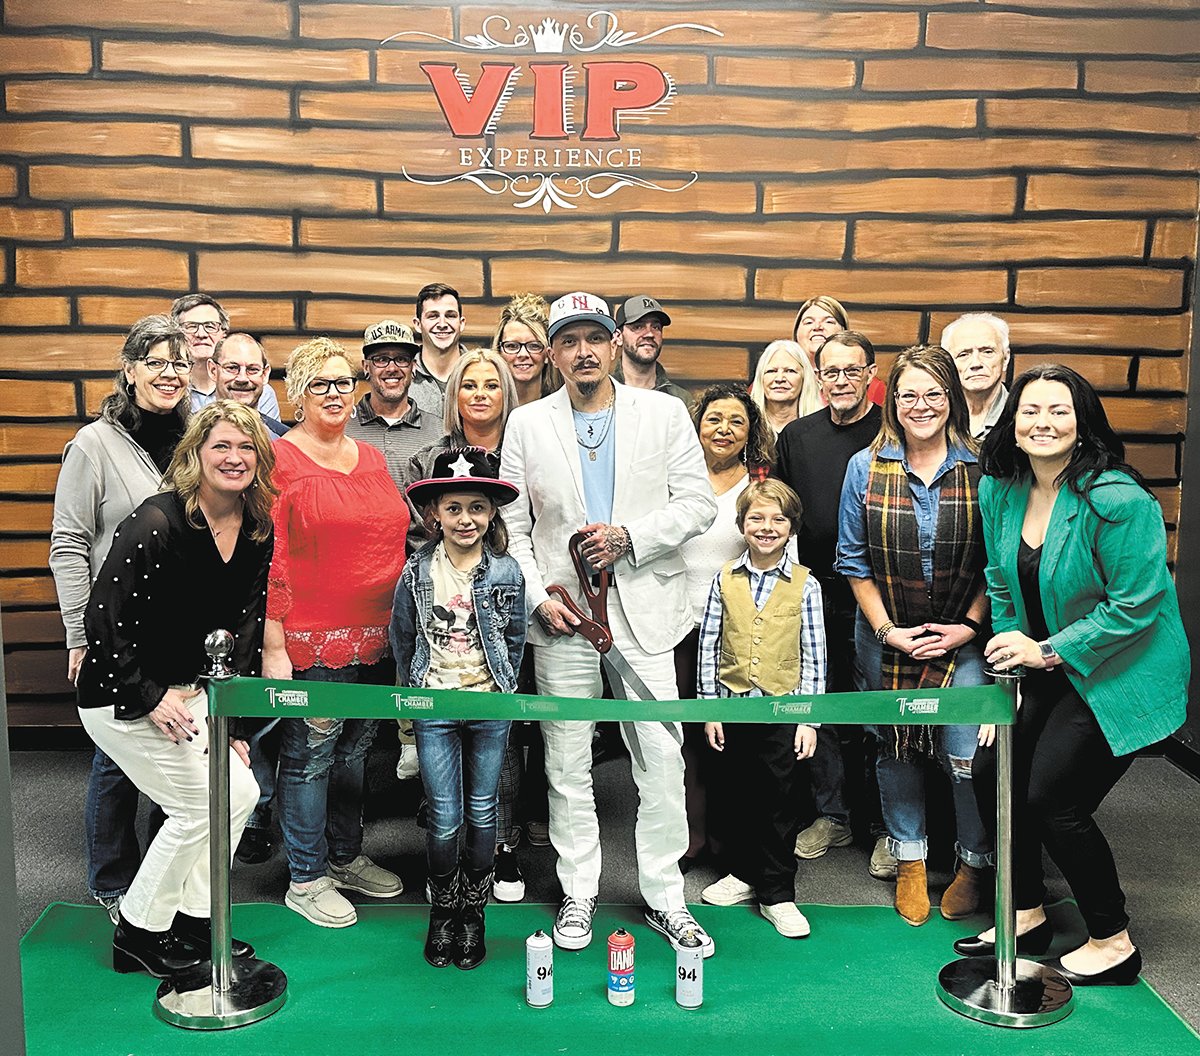 Ronnie Walters of Mystica Creations began his artwork painting customized tennis shoes and streetwear. Members of the Chamber of Commerce helped him celebrate a ribbon cutting.